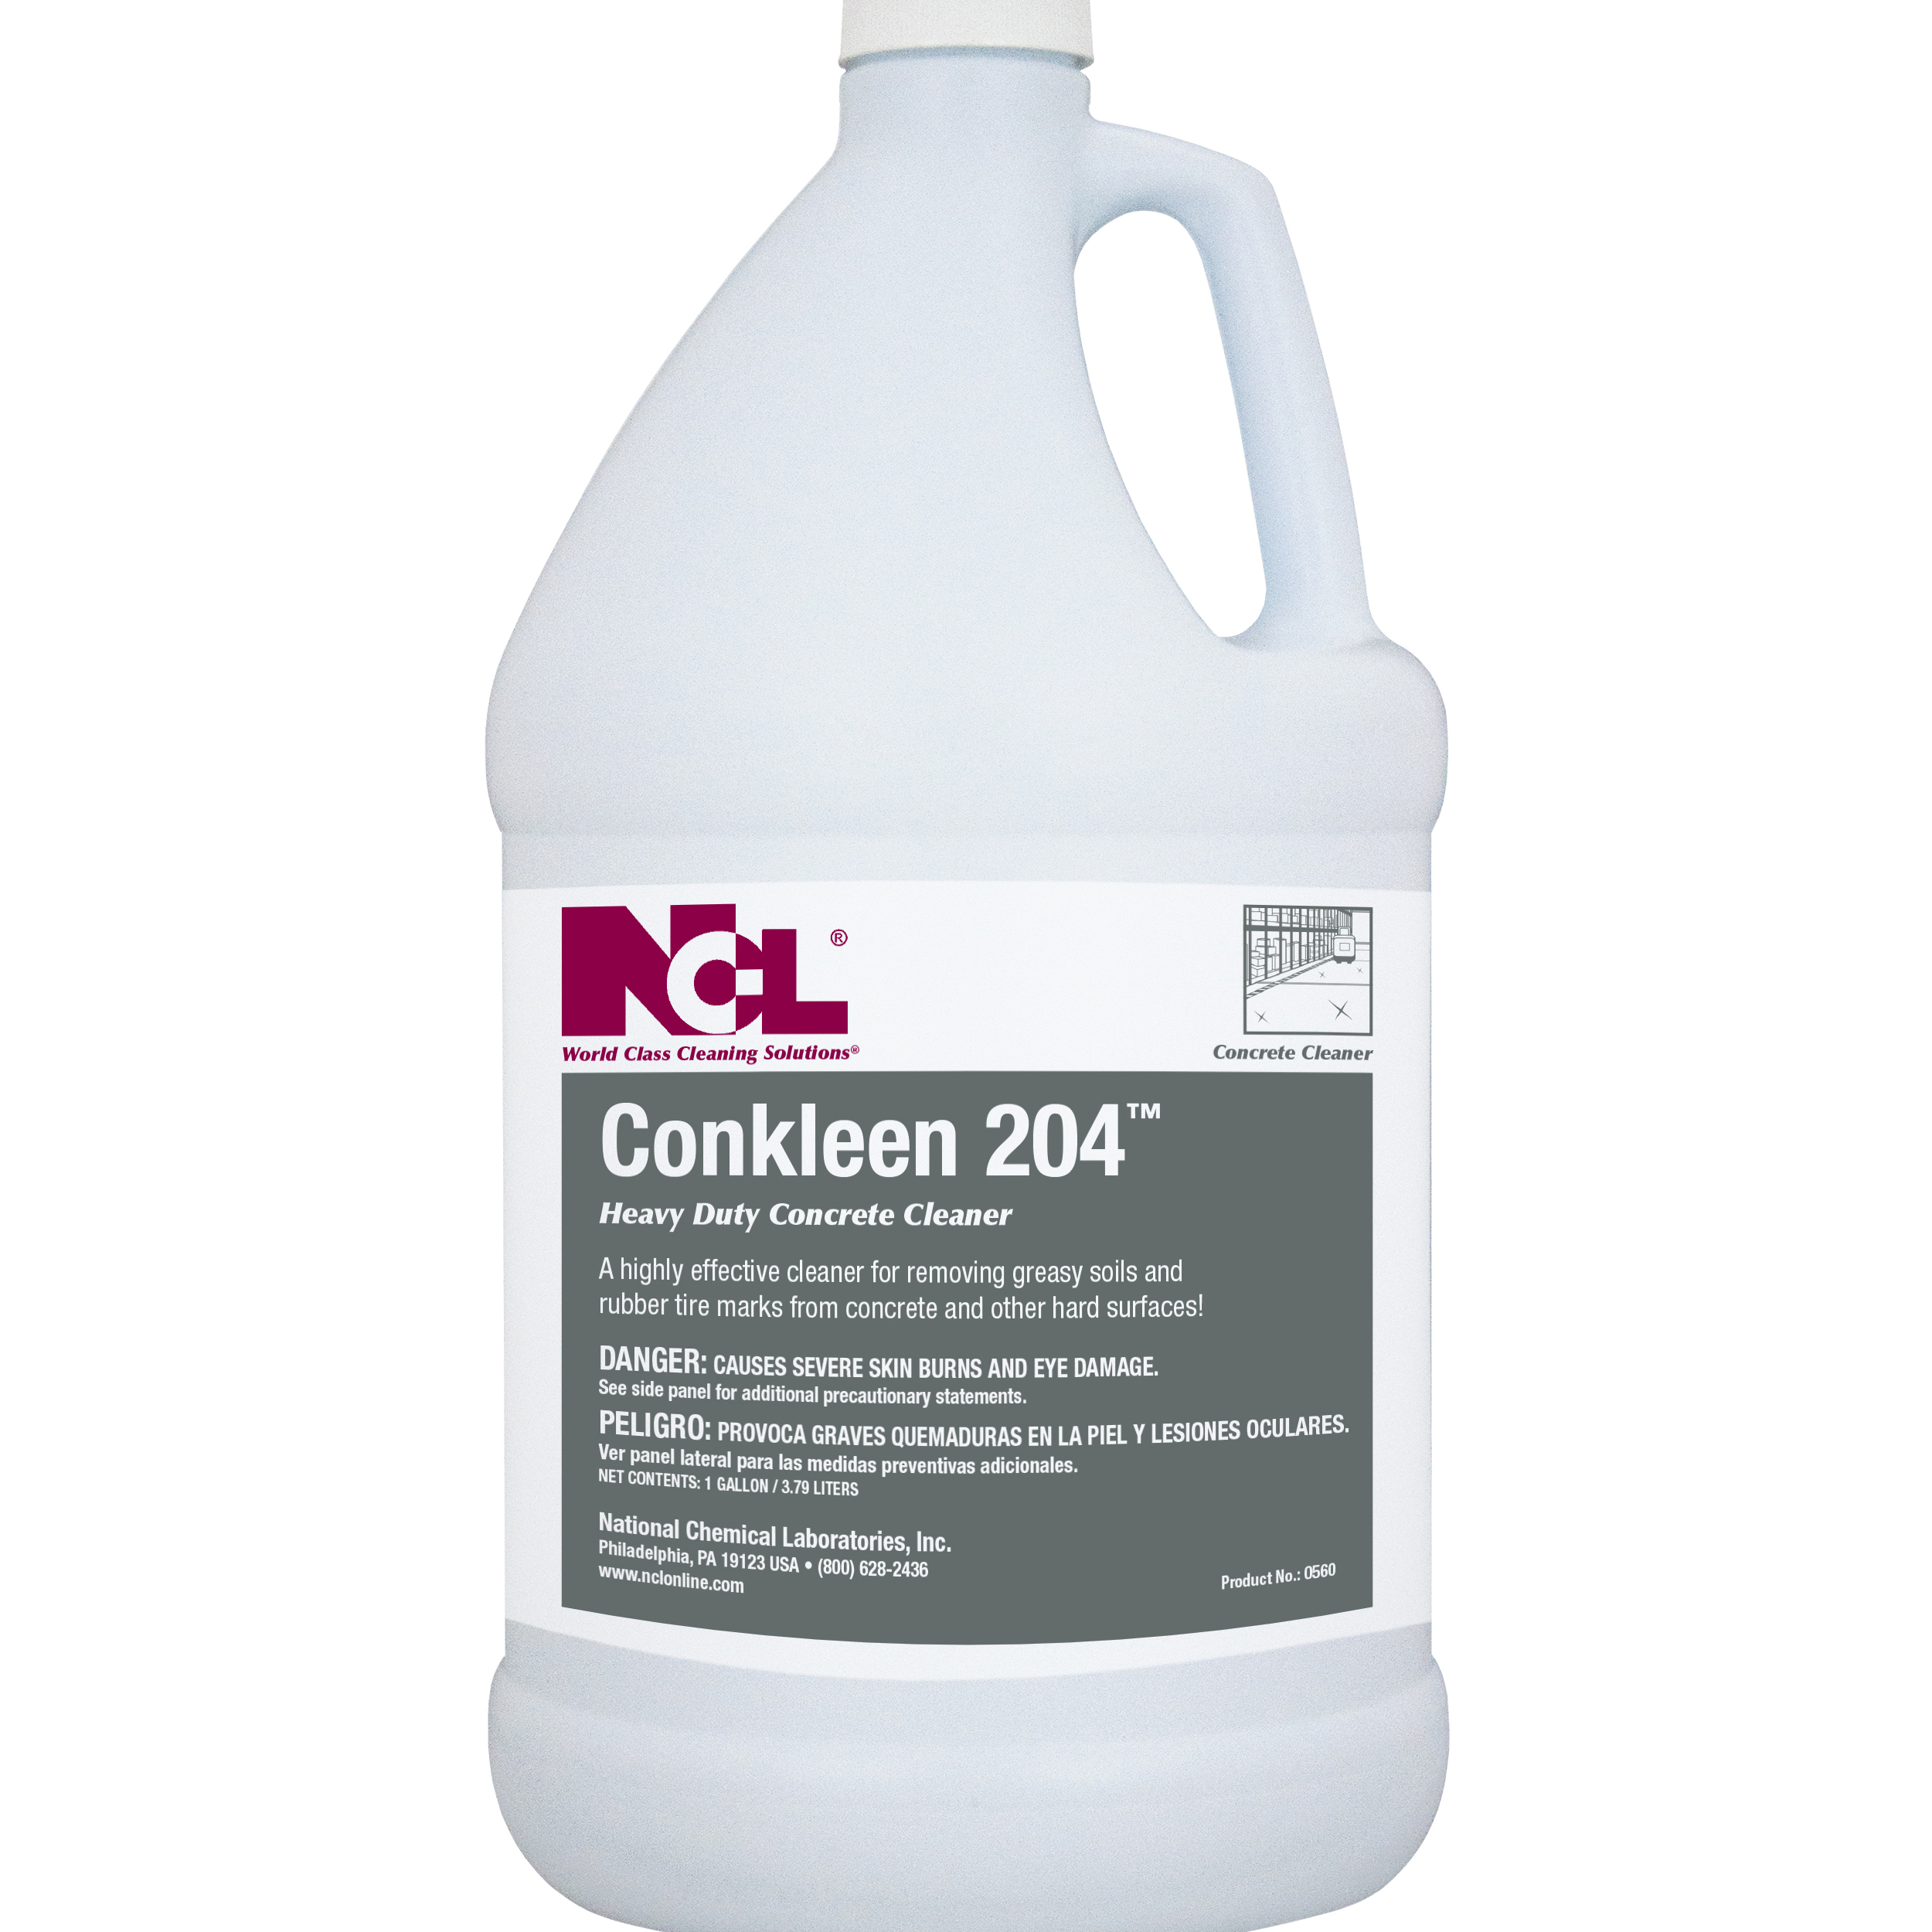  CONKLEEN 204 Heavy Duty Concrete Cleaner 4/1 Gal. Case (NCL0560-29) 